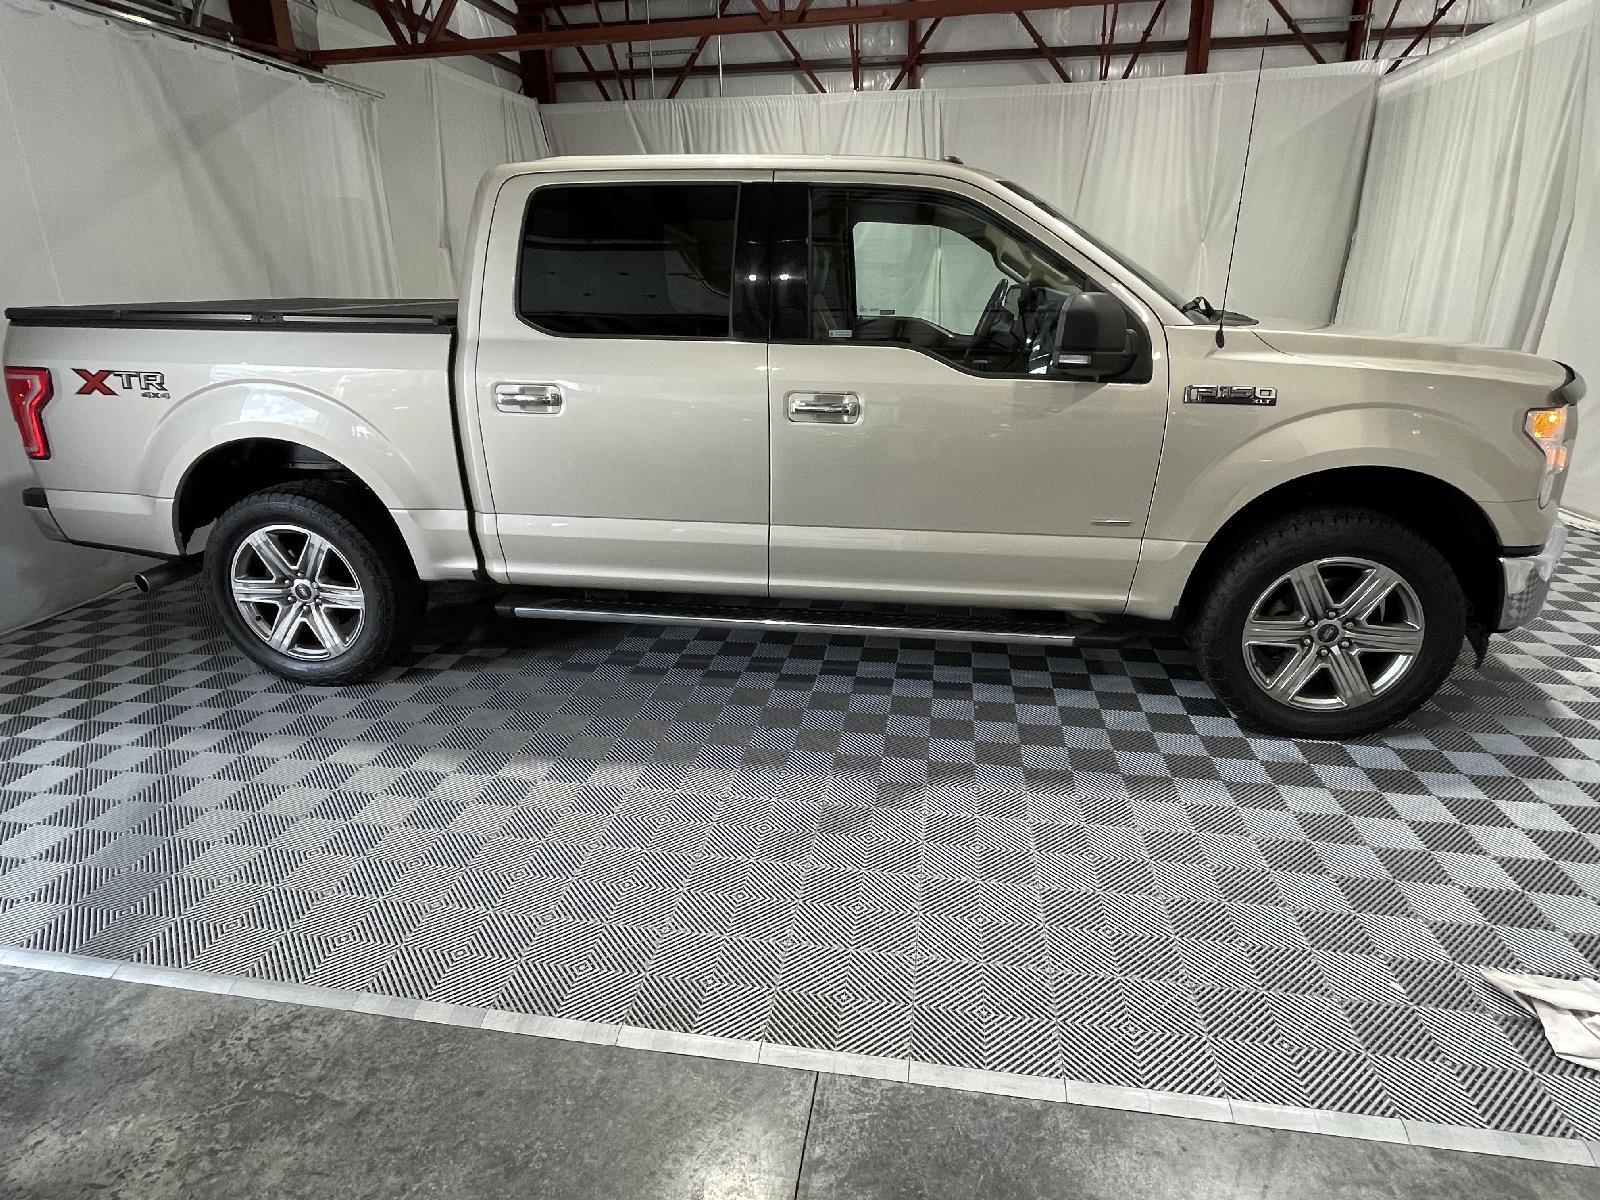 Used 2017 Ford F-150 XLT Crew Cab Truck for sale in St Joseph MO